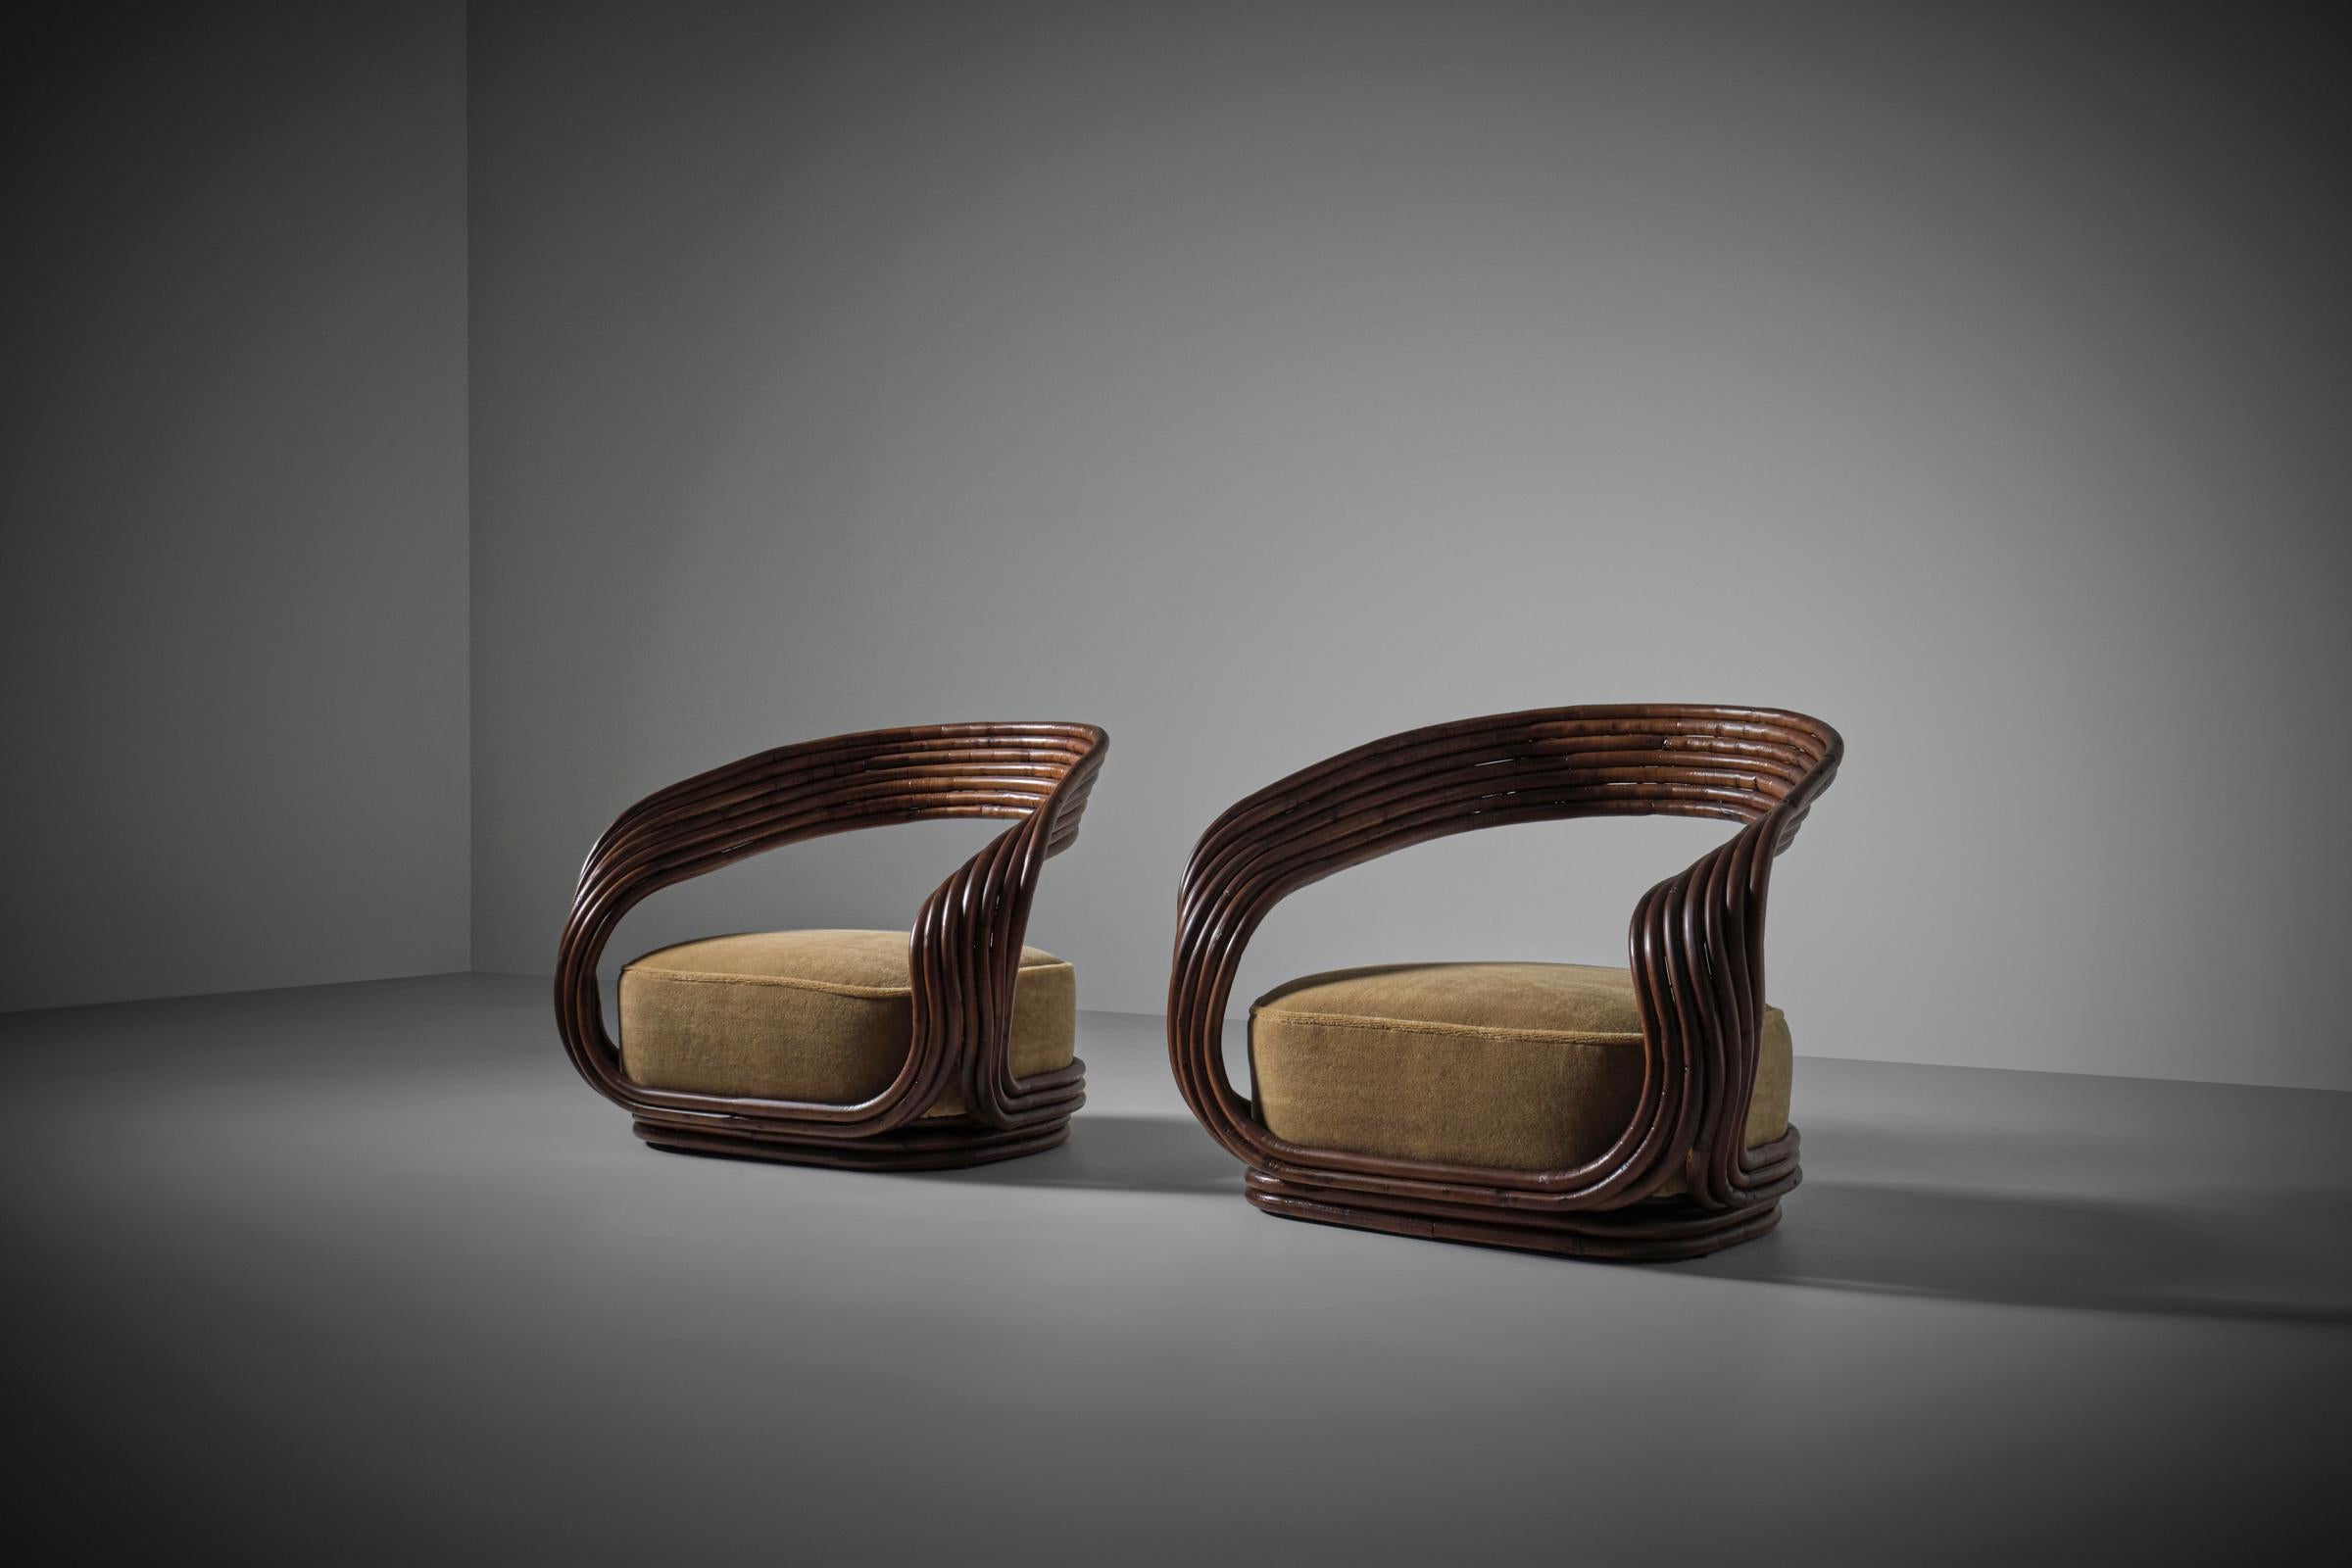 Original Eva armchairs by Giovanni Travasa for Vittorio Bonacina, Italy 1965. Beautiful sculptural bent palm frame which are shaped together like ribbons with a large cushioned seat. The old model is different from the newer production, the old ones